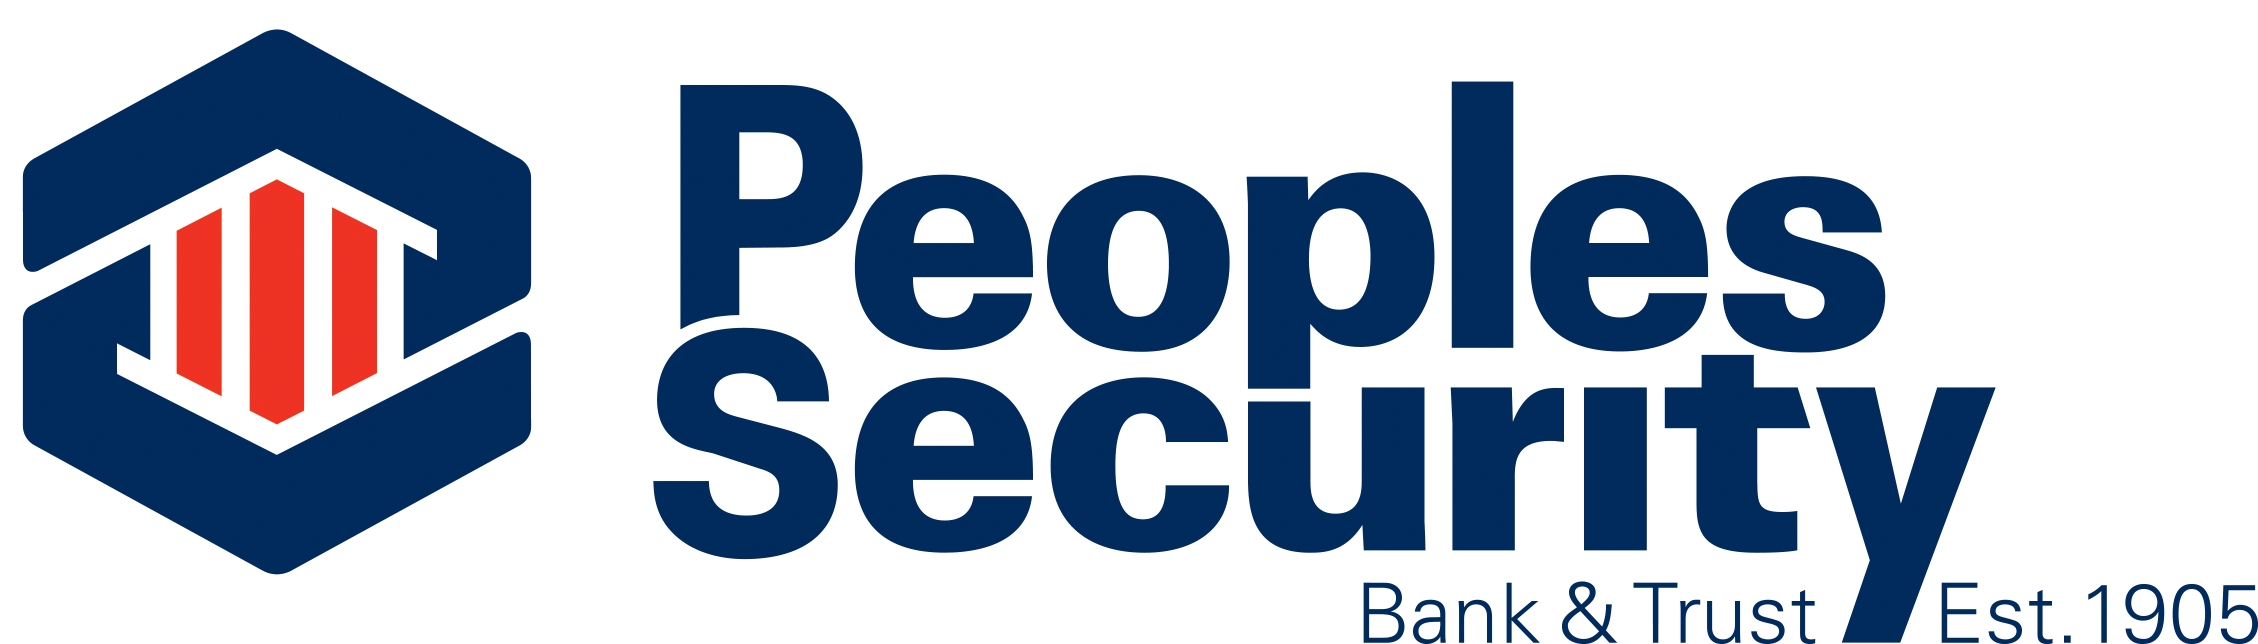 Peoples Security Bank & Trust Logo